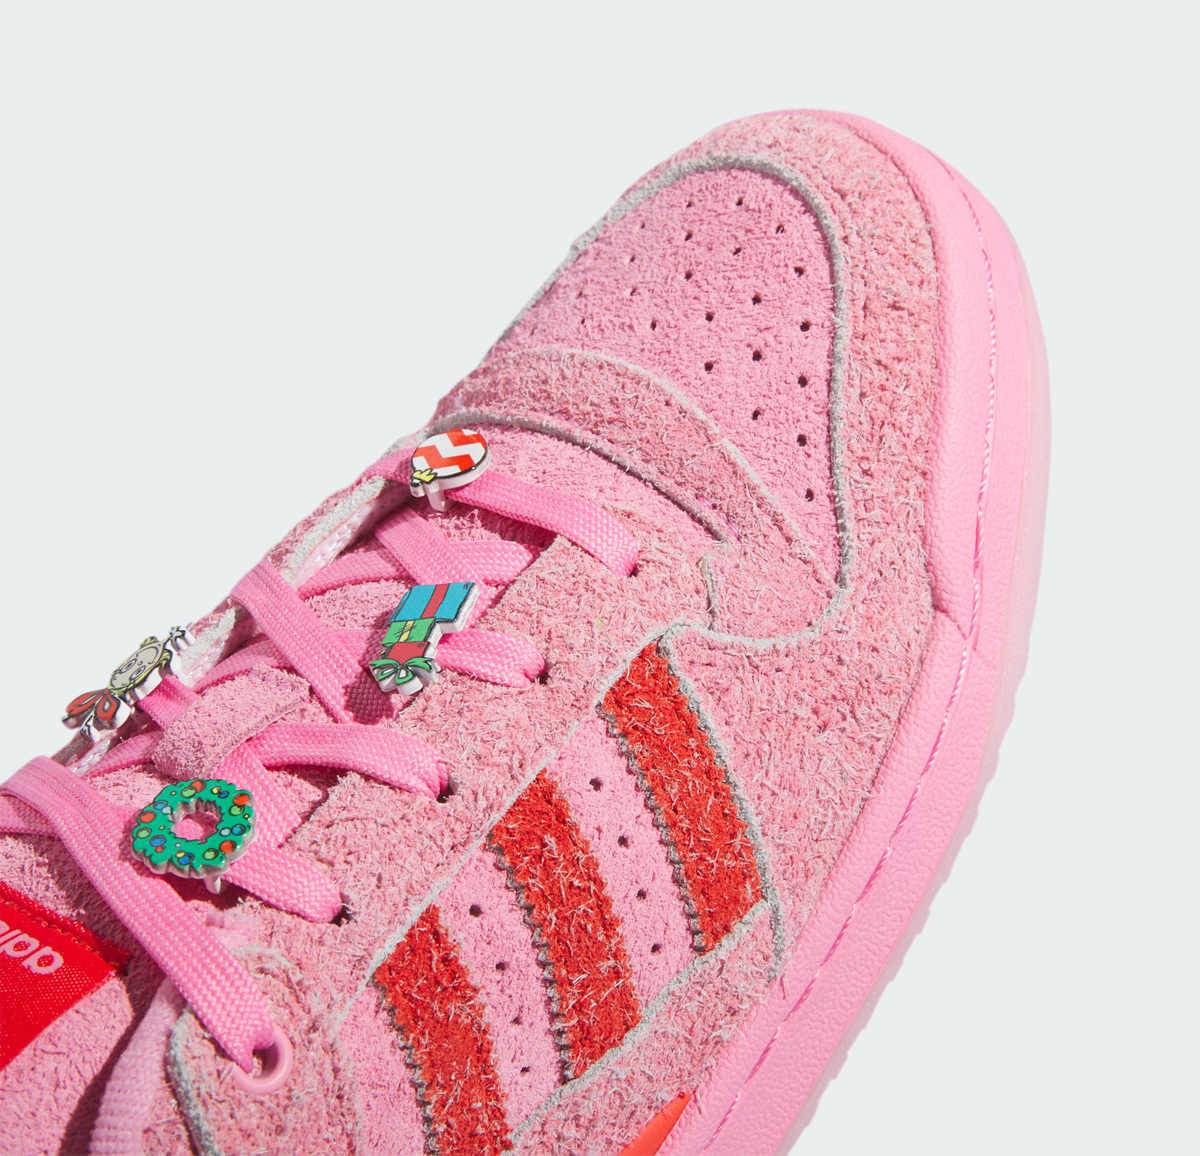 adidas-Forum-Low-The-Grinch-Pink-Cindy-Lou-Who-Release-Date-8